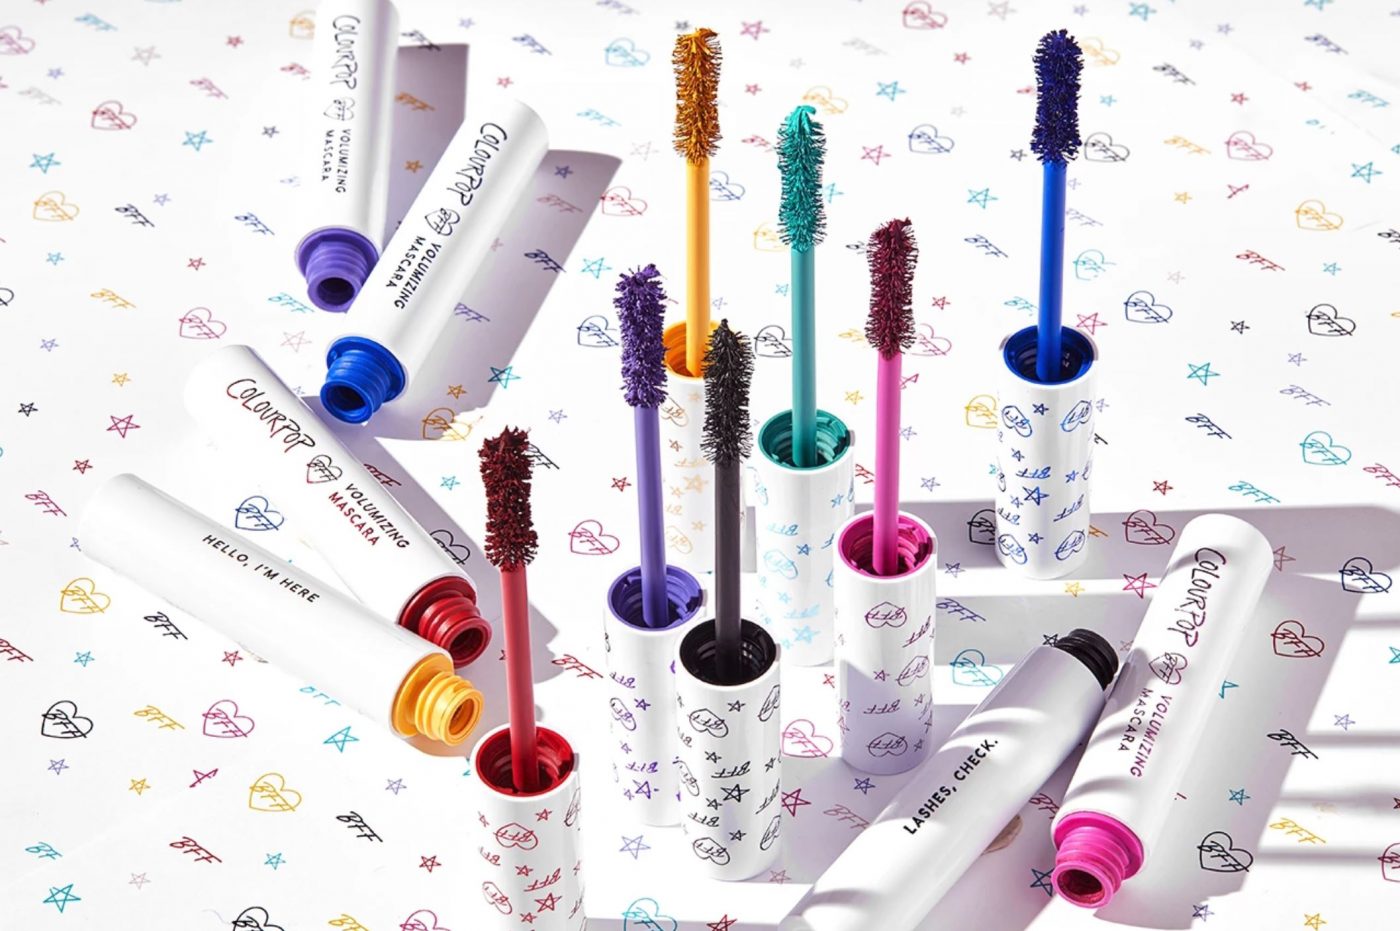 ColourPop's $8 USD Mascara Will Be Your Lashes' New BFF